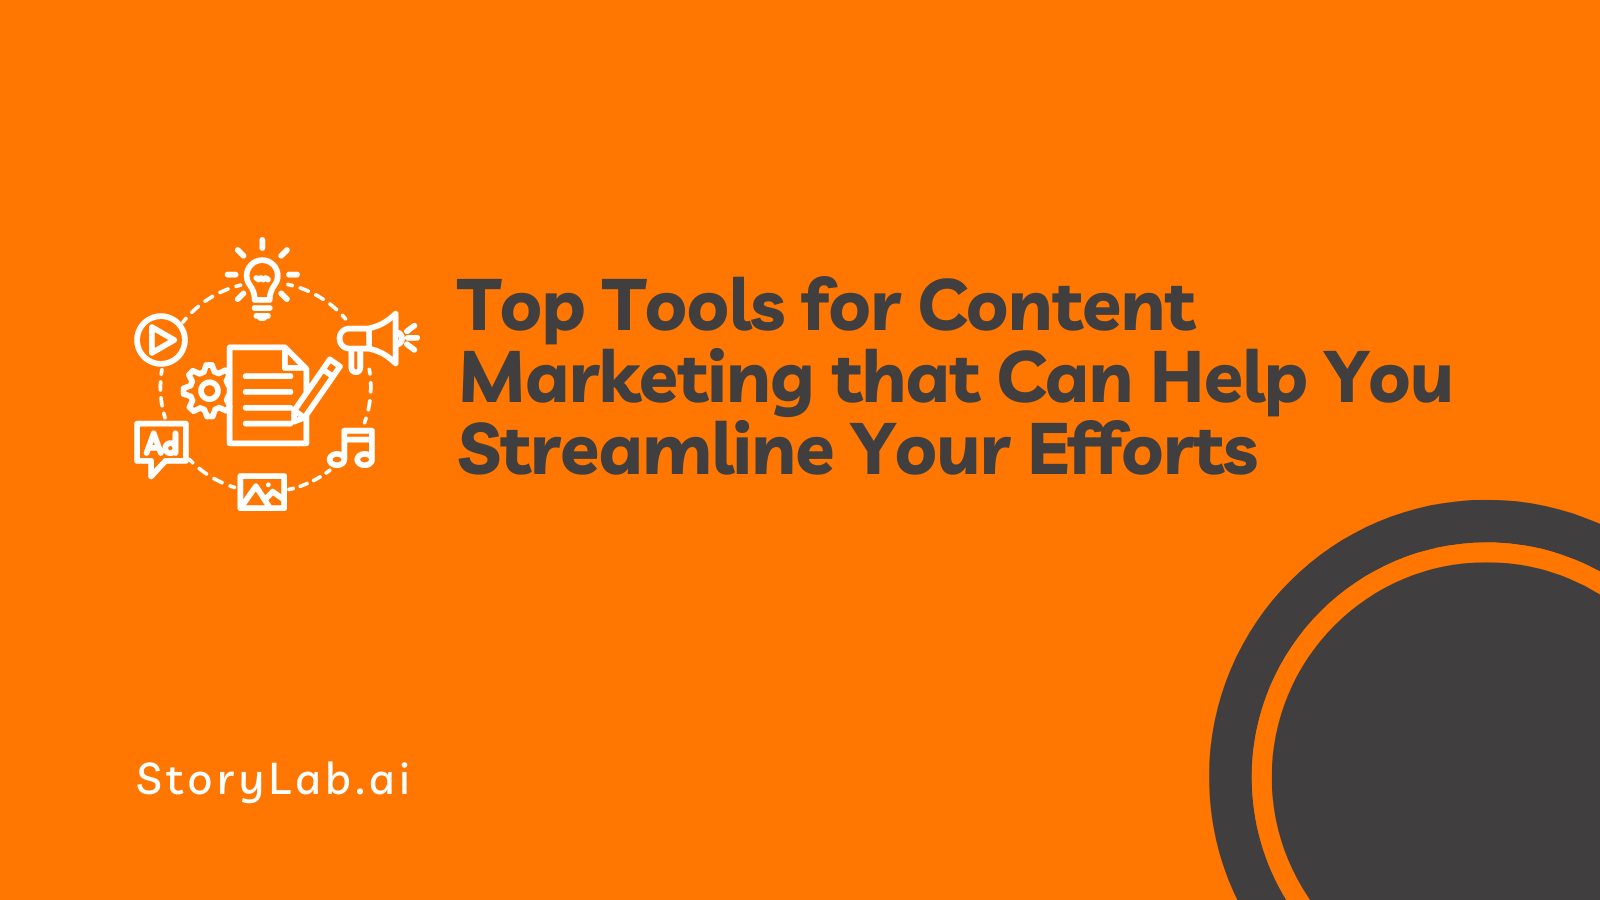 Top Tools for Content Marketing that Can Help You Streamline Your Efforts